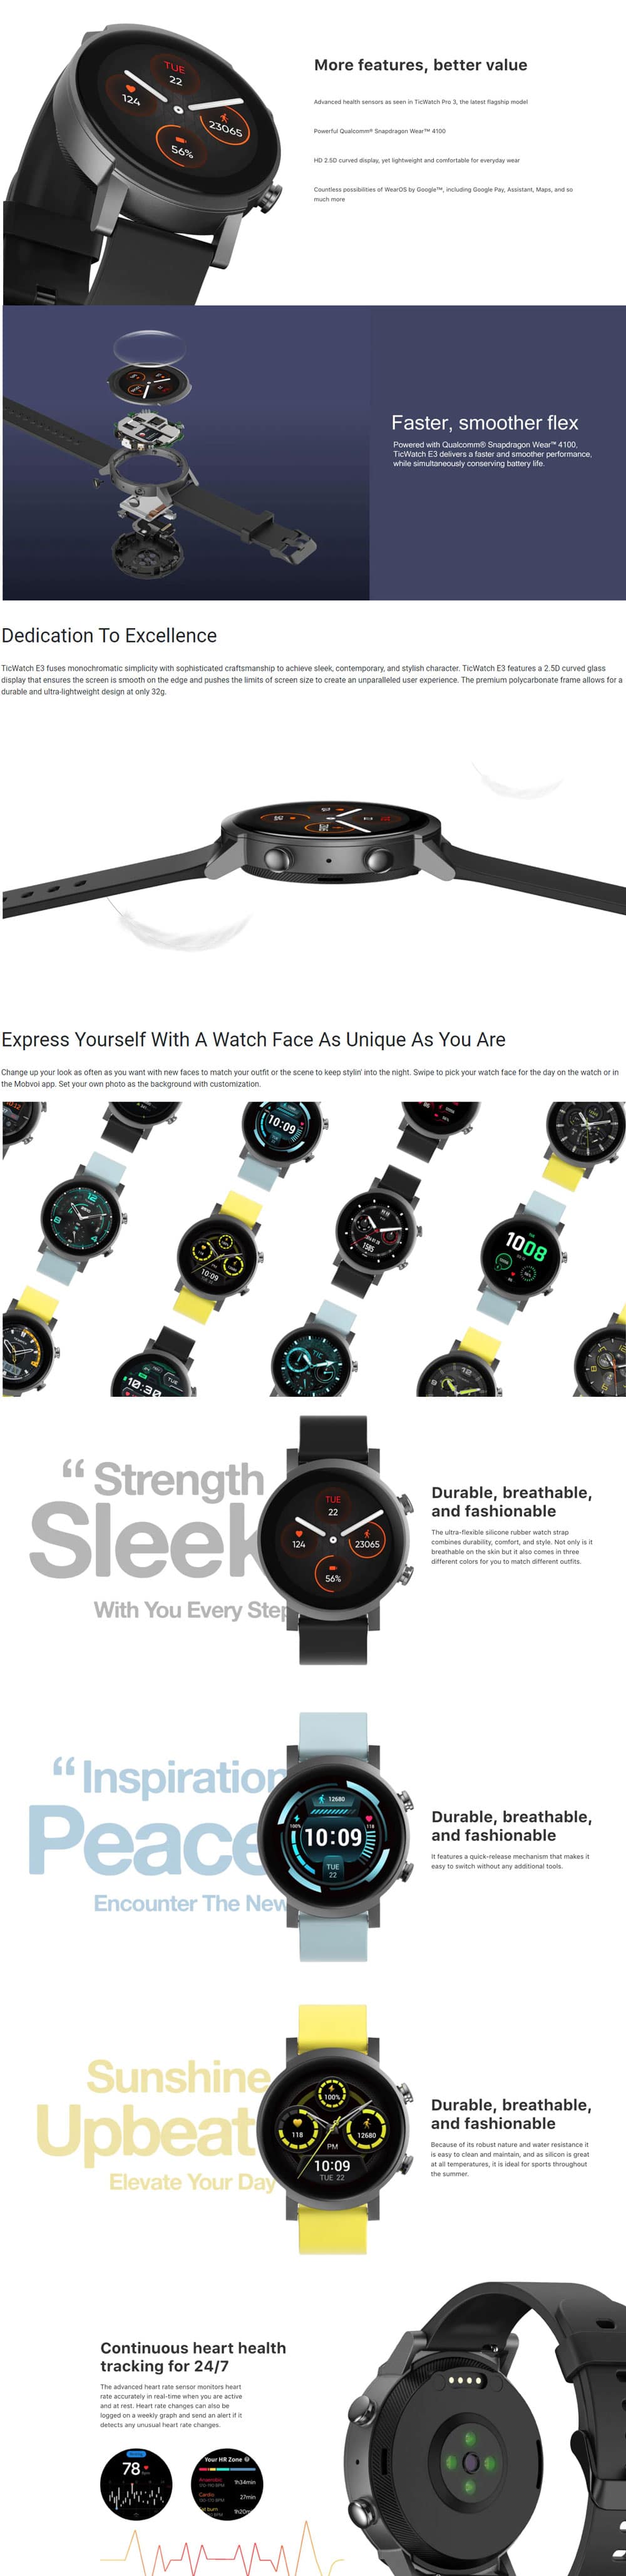 TicWatch E3 Android Wear OS Smart Watch 6